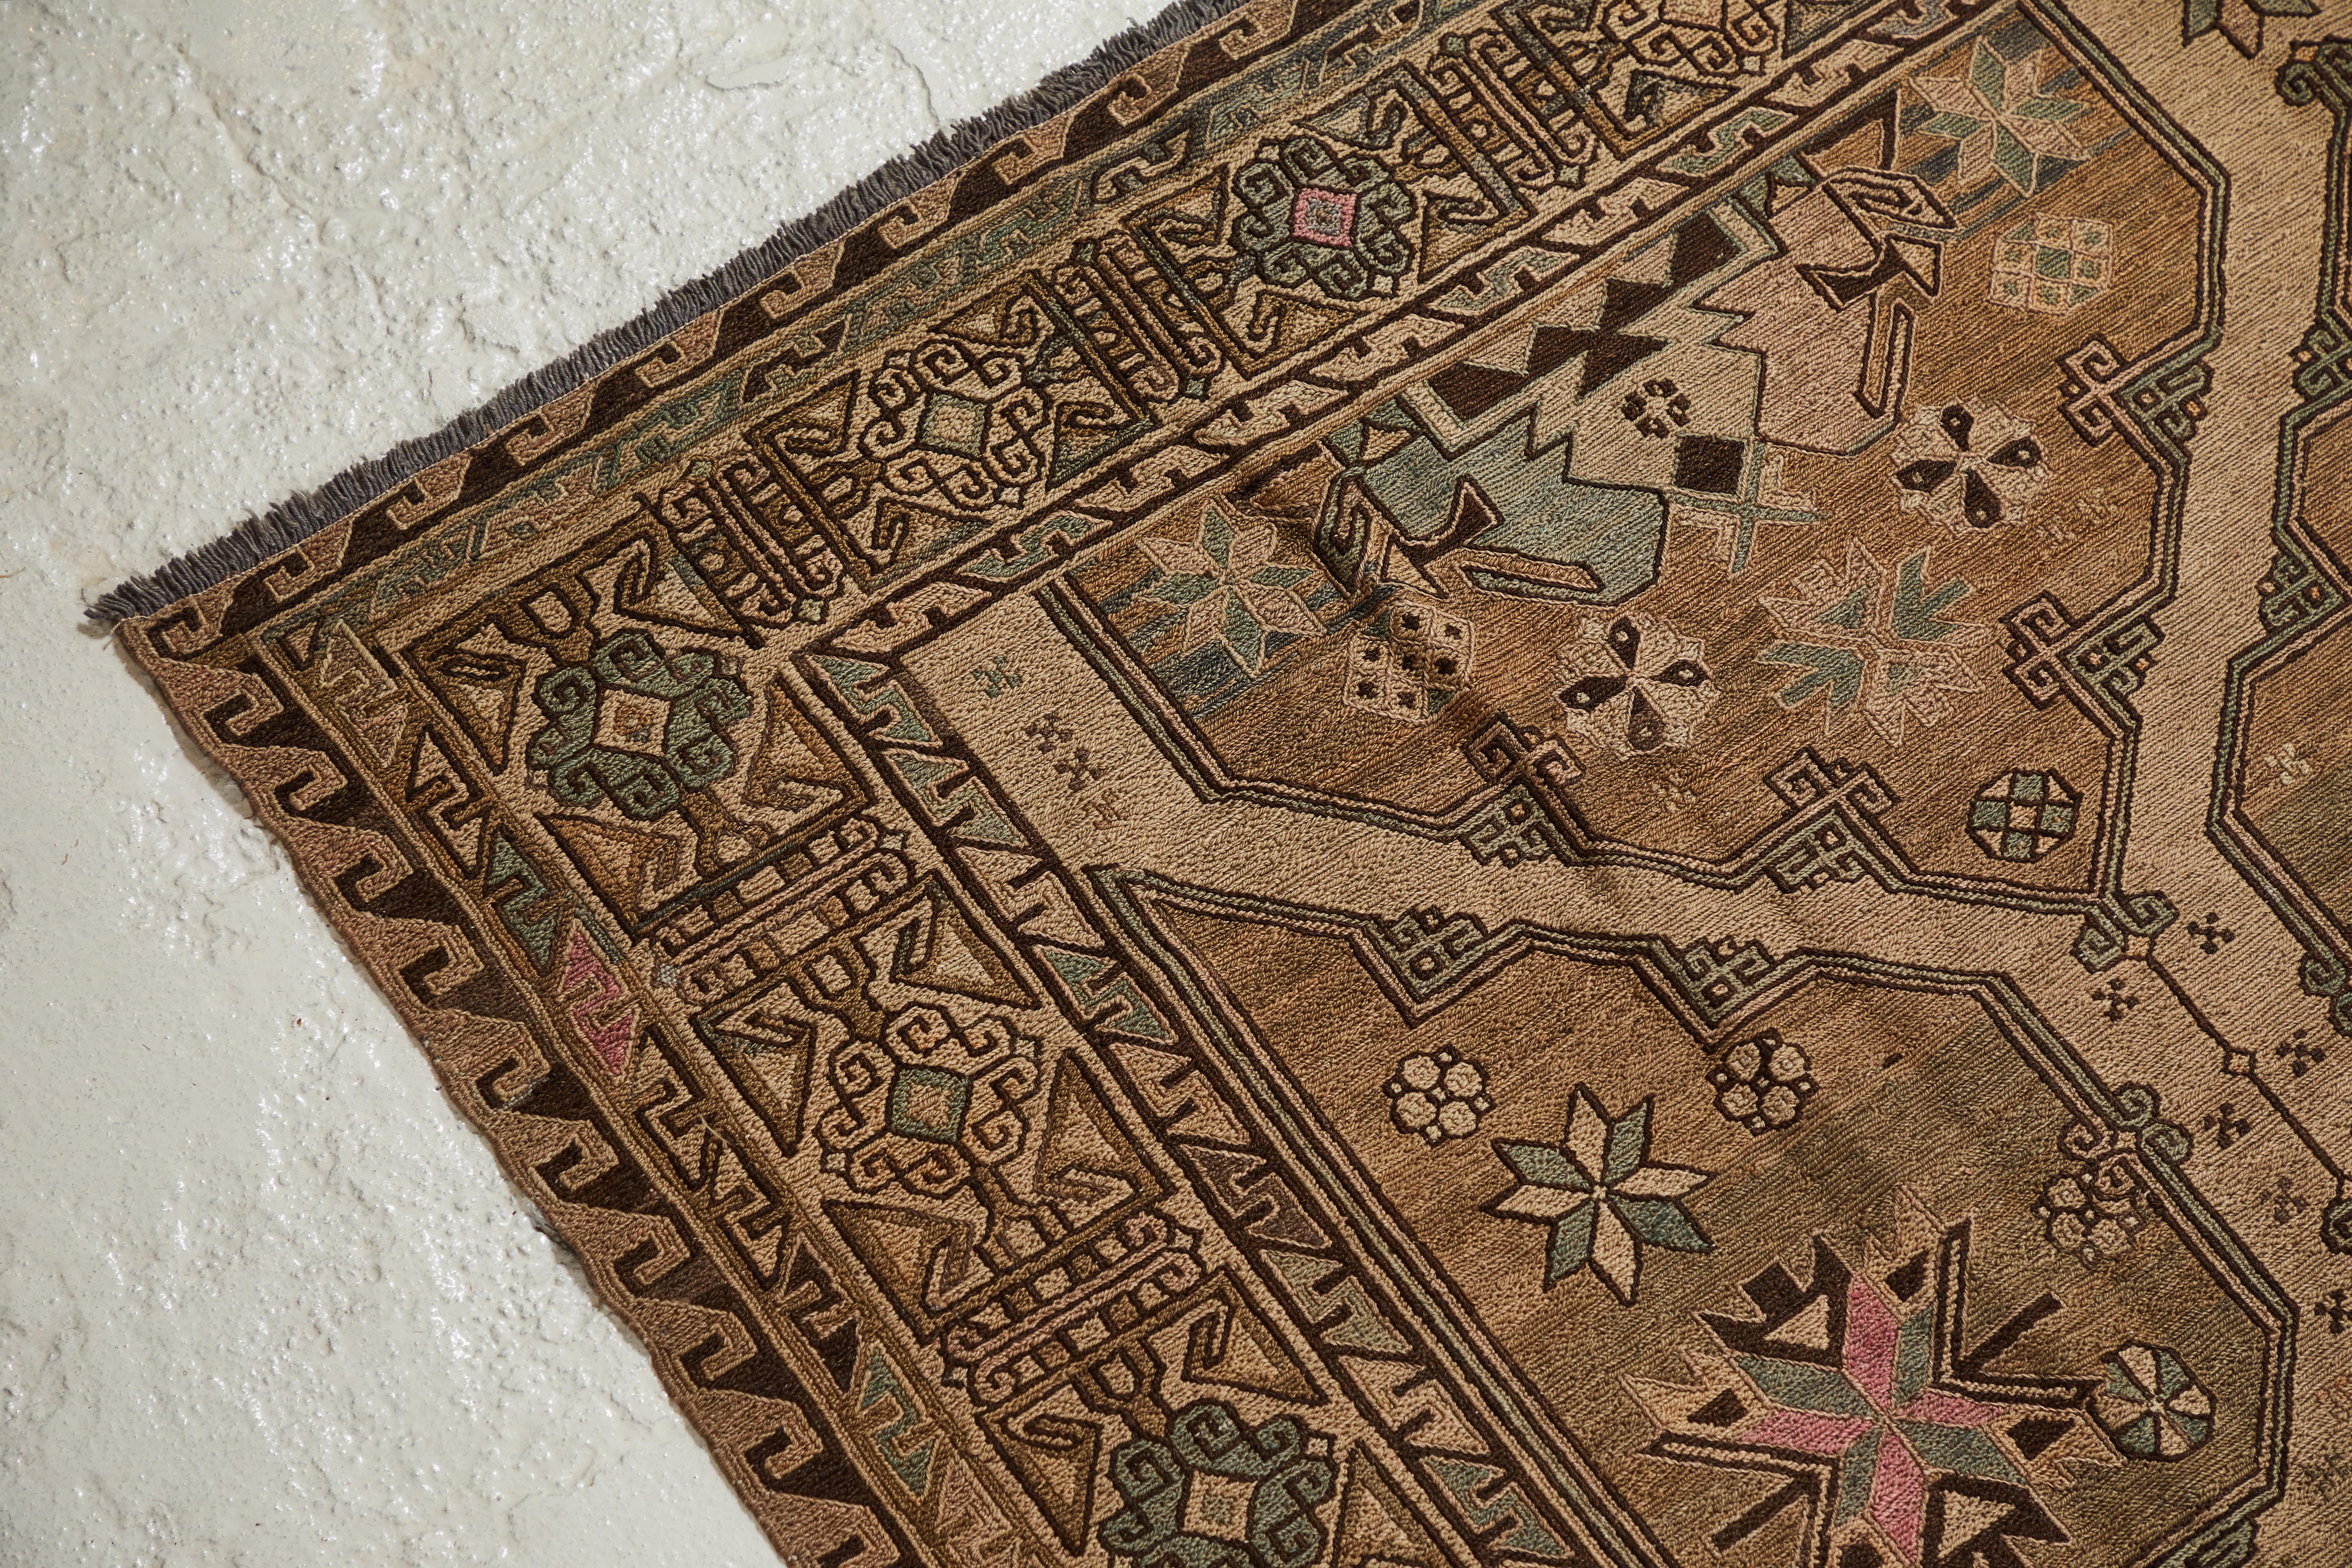 Beautifully detailed antique Turkish rug with a traditional pattern. The rug offers hues of natural, light pink and light green. The rug is beautifully aged and worn.